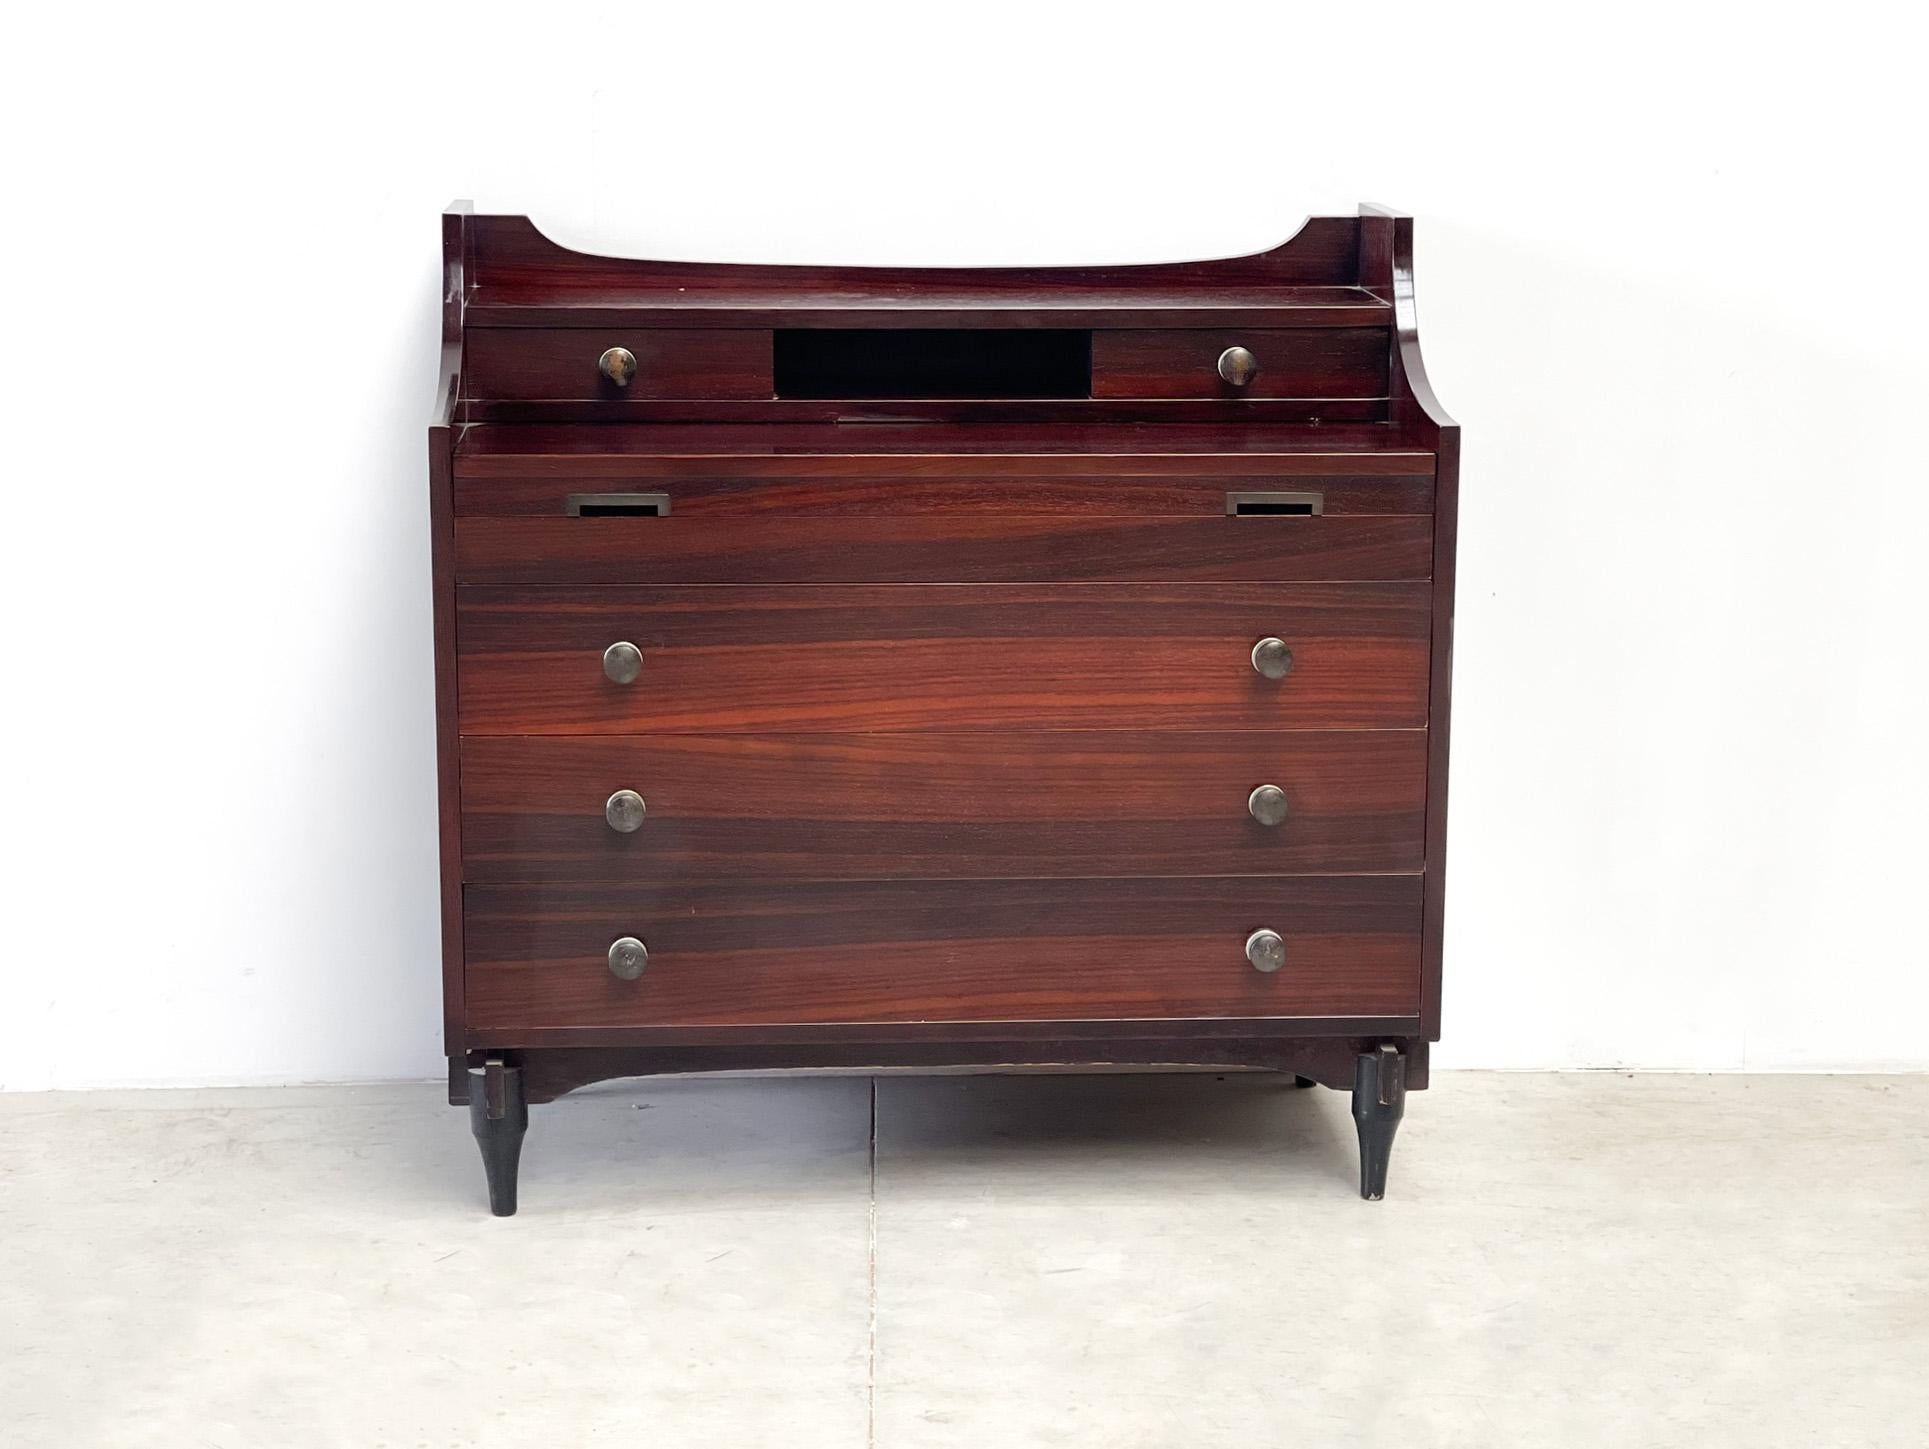 A nice italian cabinet from the 1960s. This cabinet was designed by Claudio Salocchi for Sormani
It is a nice example of elegant italian desgin but also functional. You can use it as an normal chest of drawers but if you pull out the top drawer